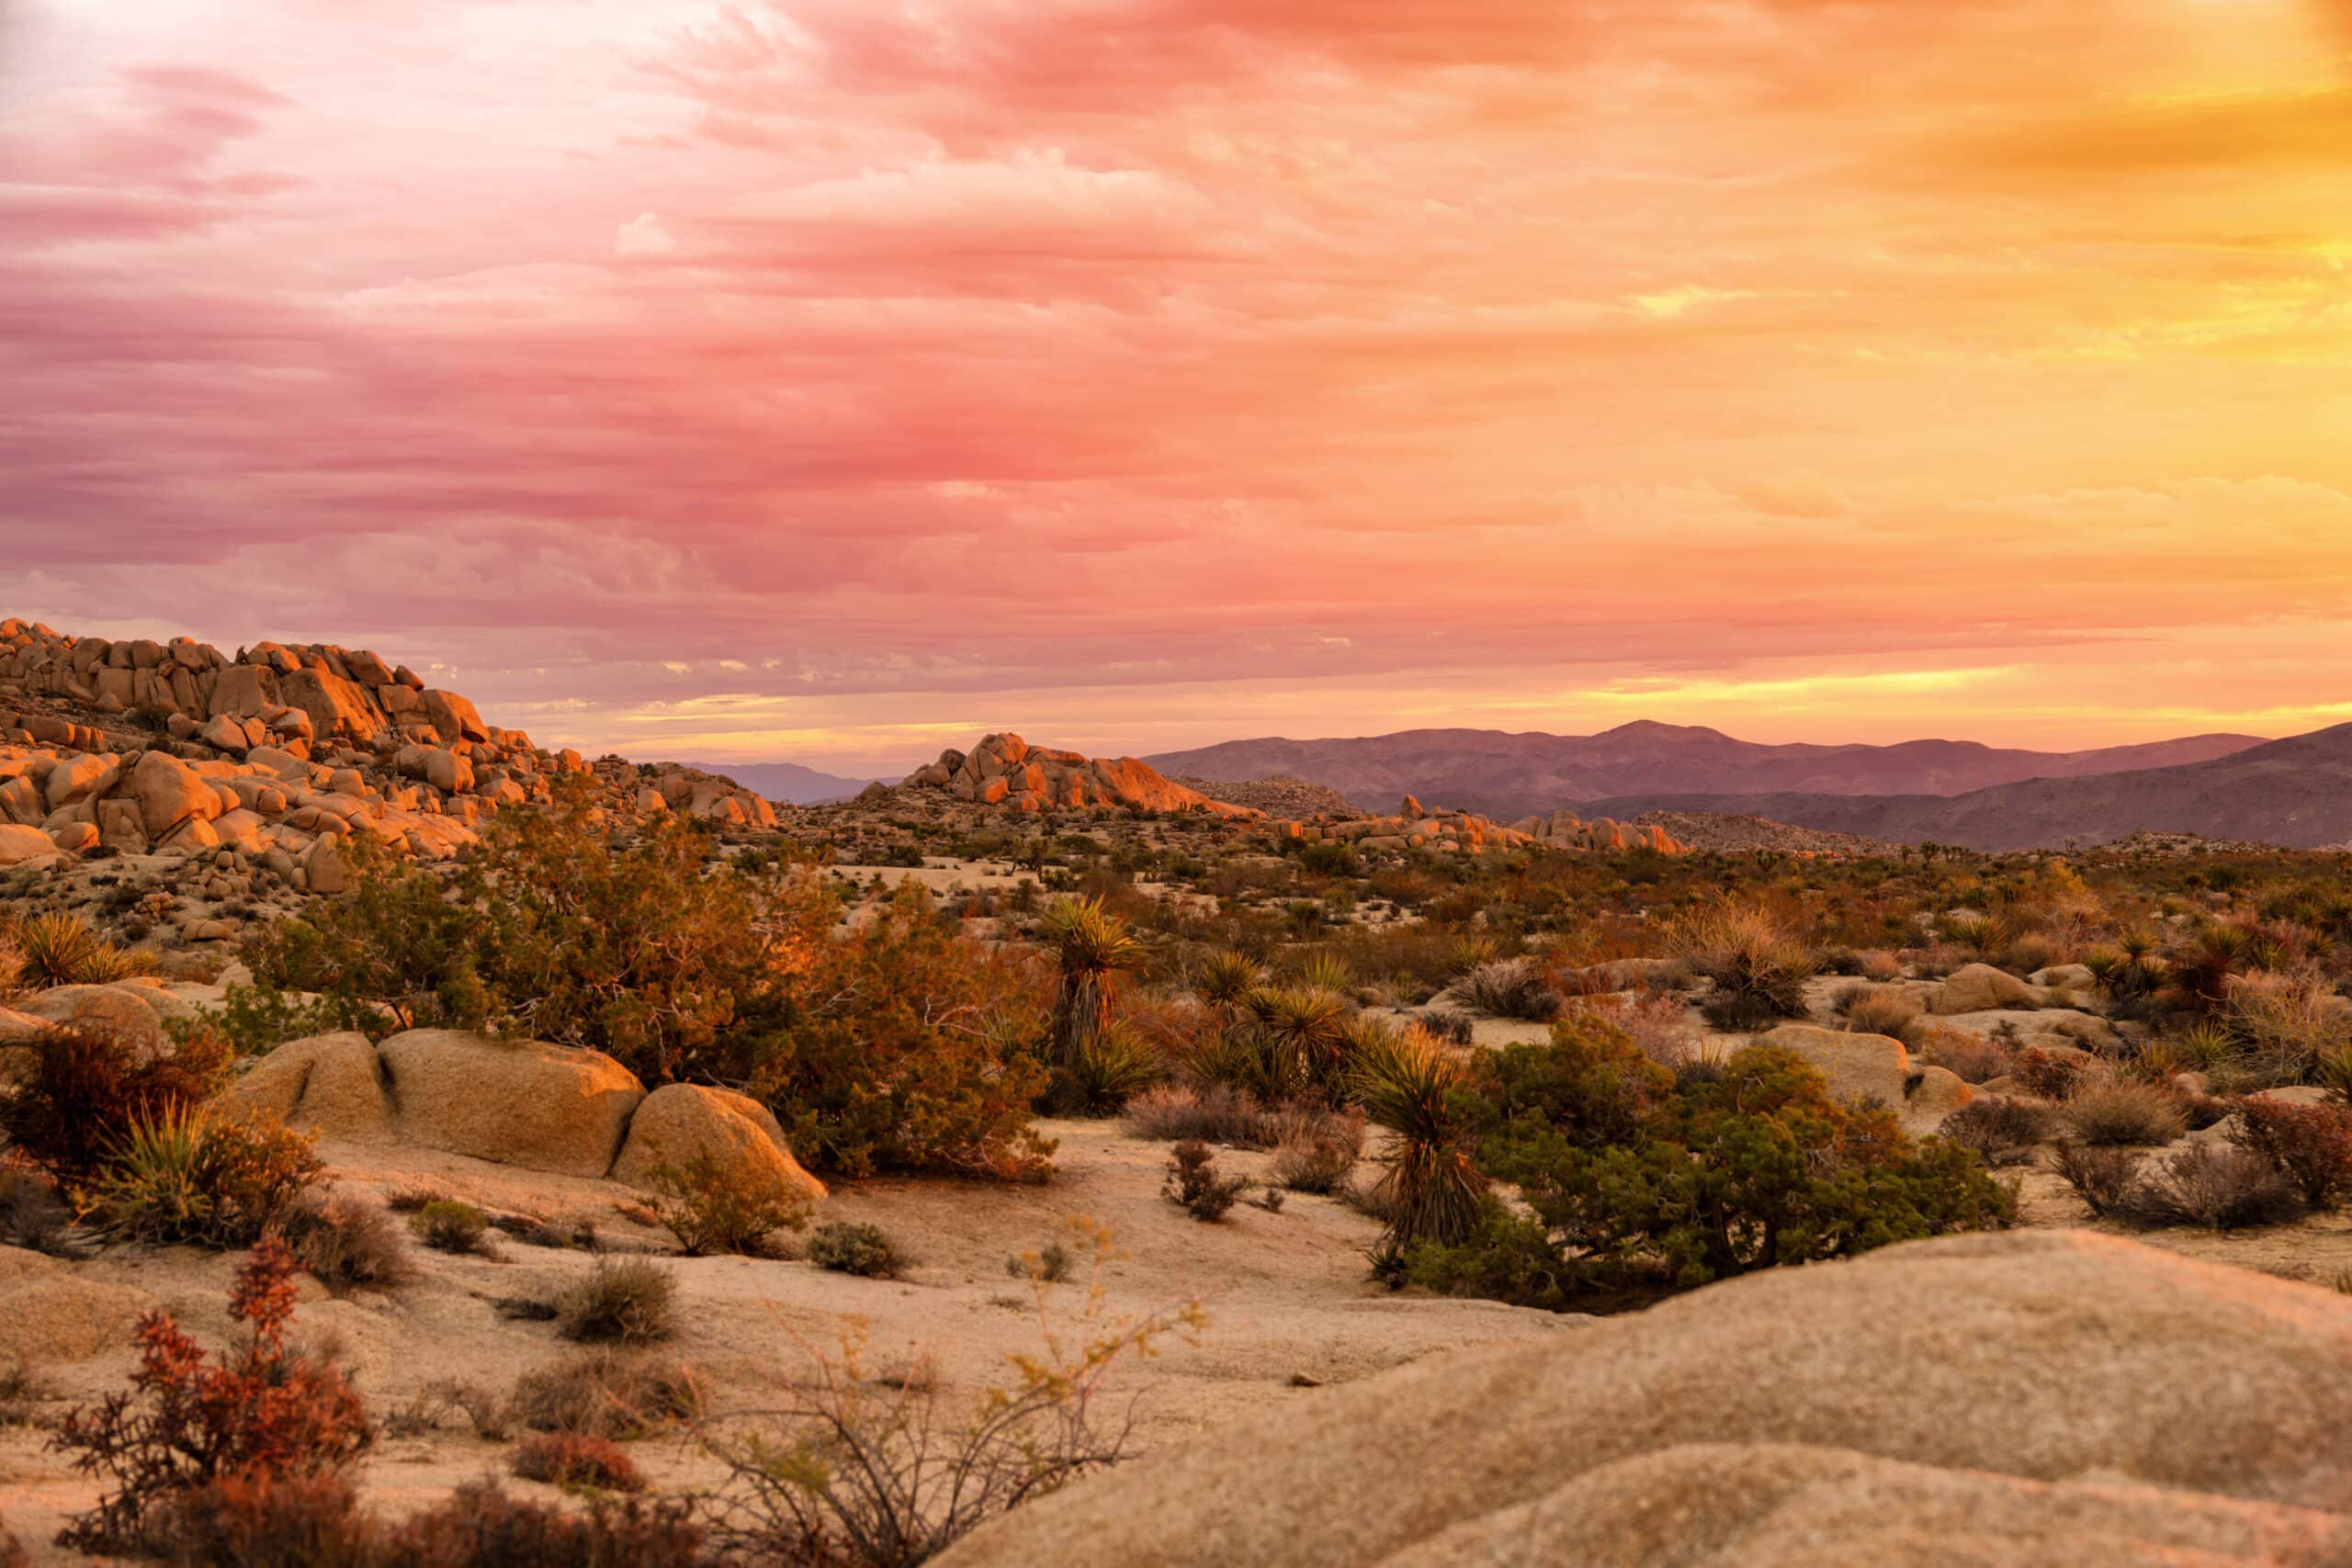 A desert landscape at sunset with vibrant pink and orange clouds in the sky, rocky formations, and scattered vegetation including shrubs and yucca plants.